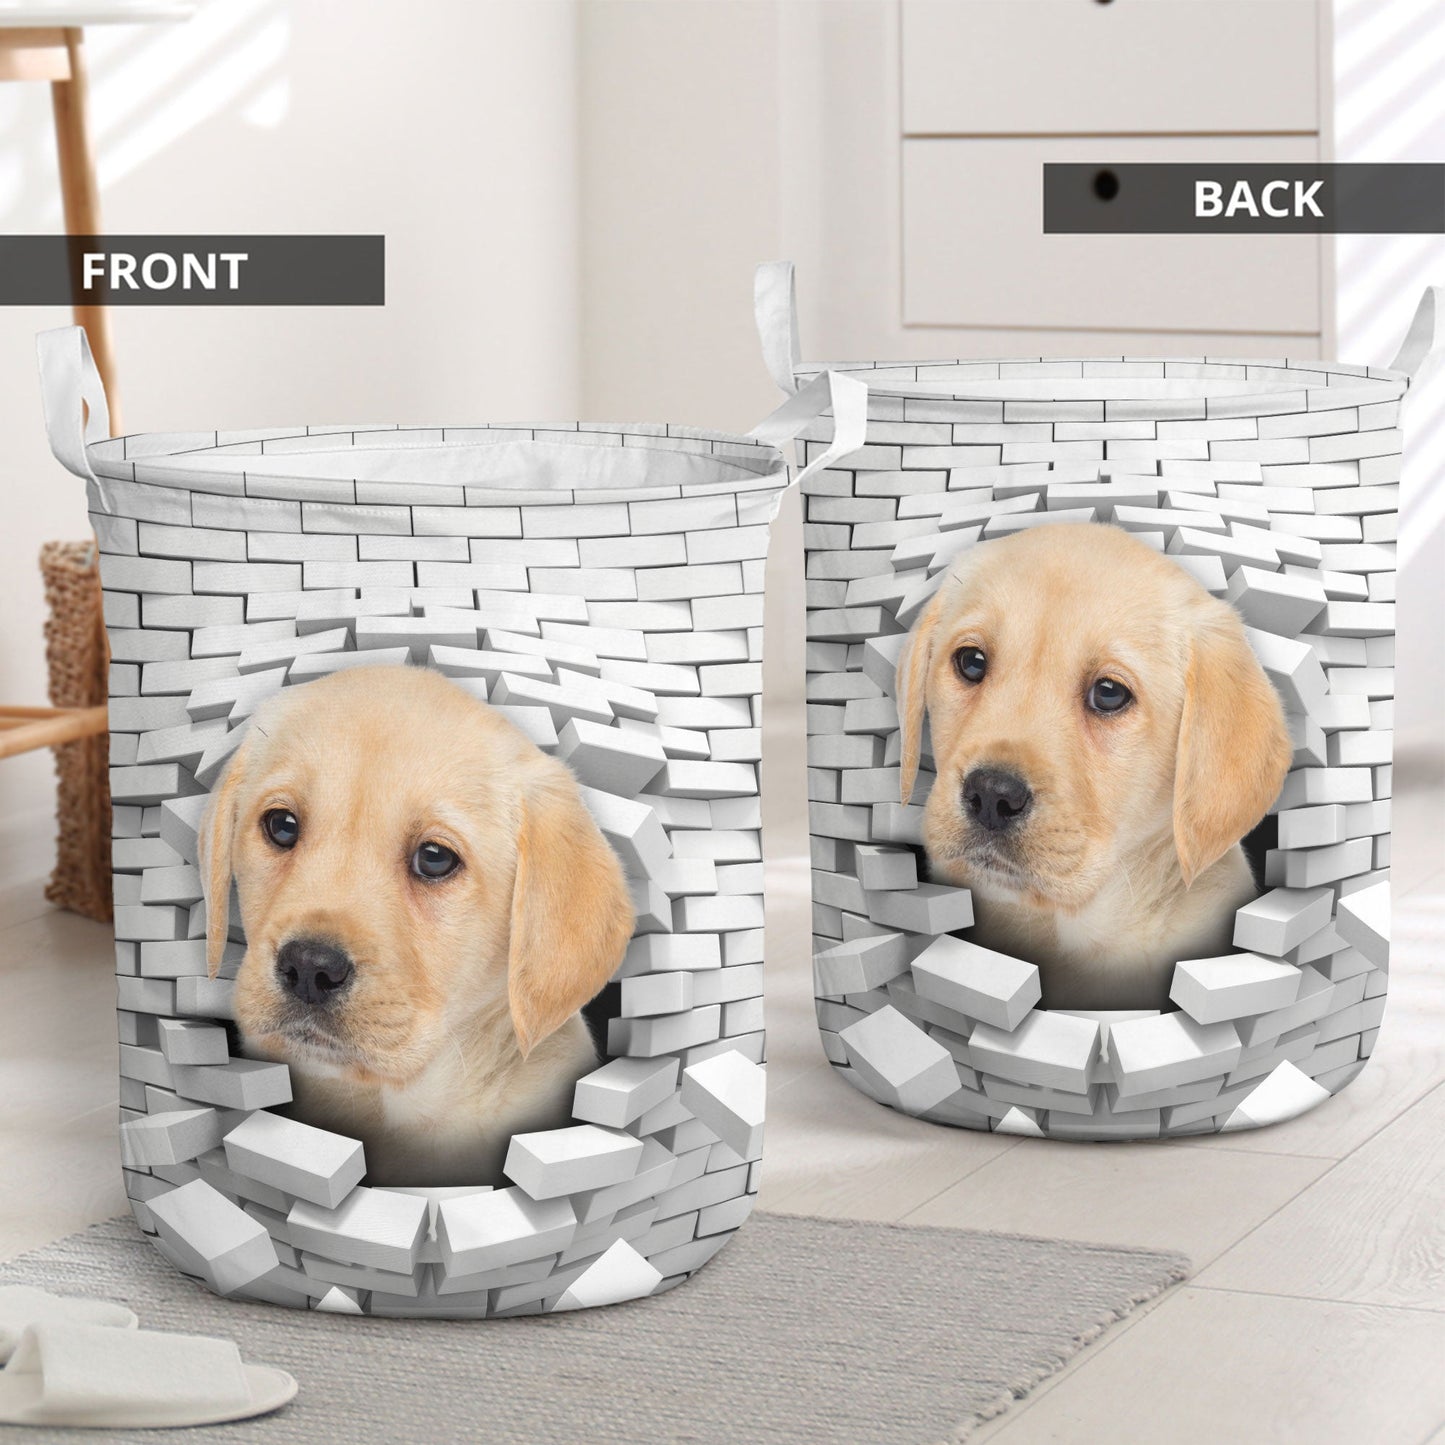 Labrador Retriever - In The Hole Of Wall Pattern Laundry Basket